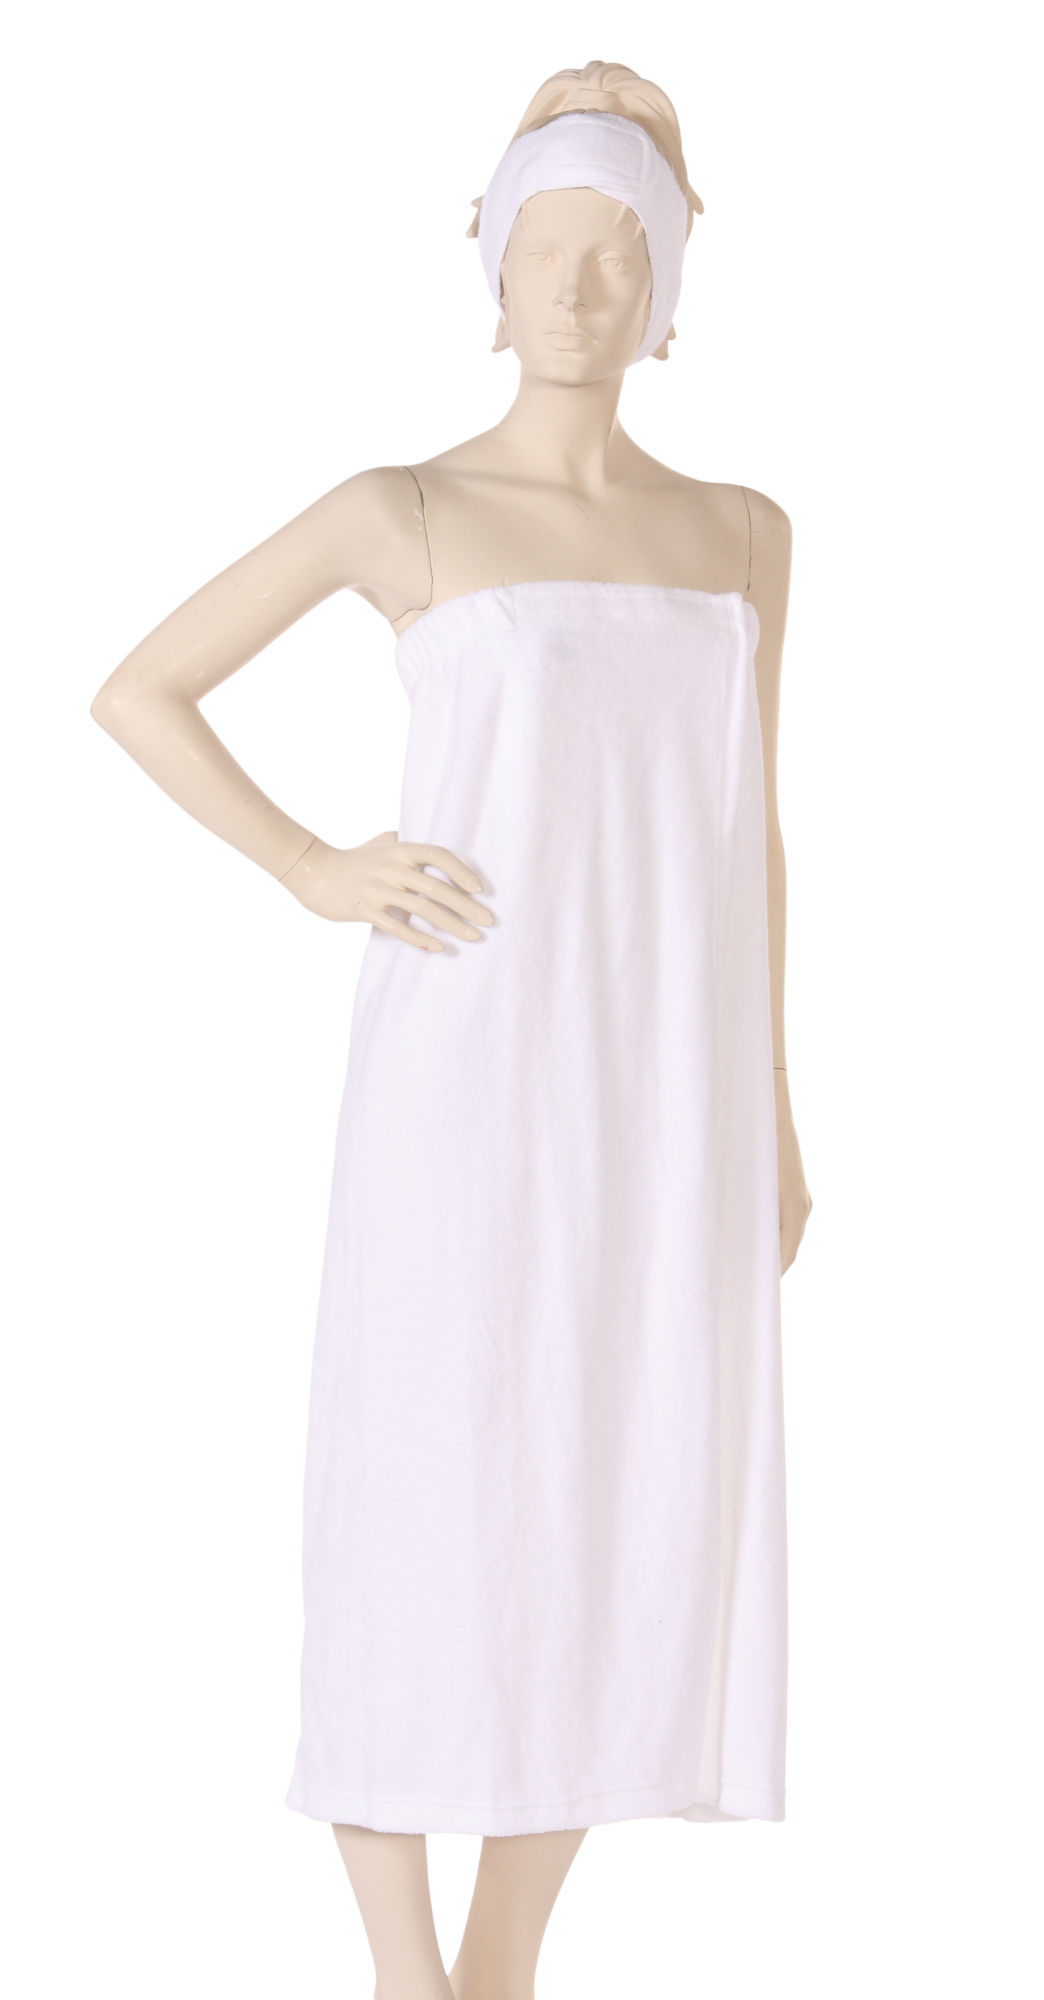 Body Wrap with Hook and Loop Closure Stretch Terry fabric in White